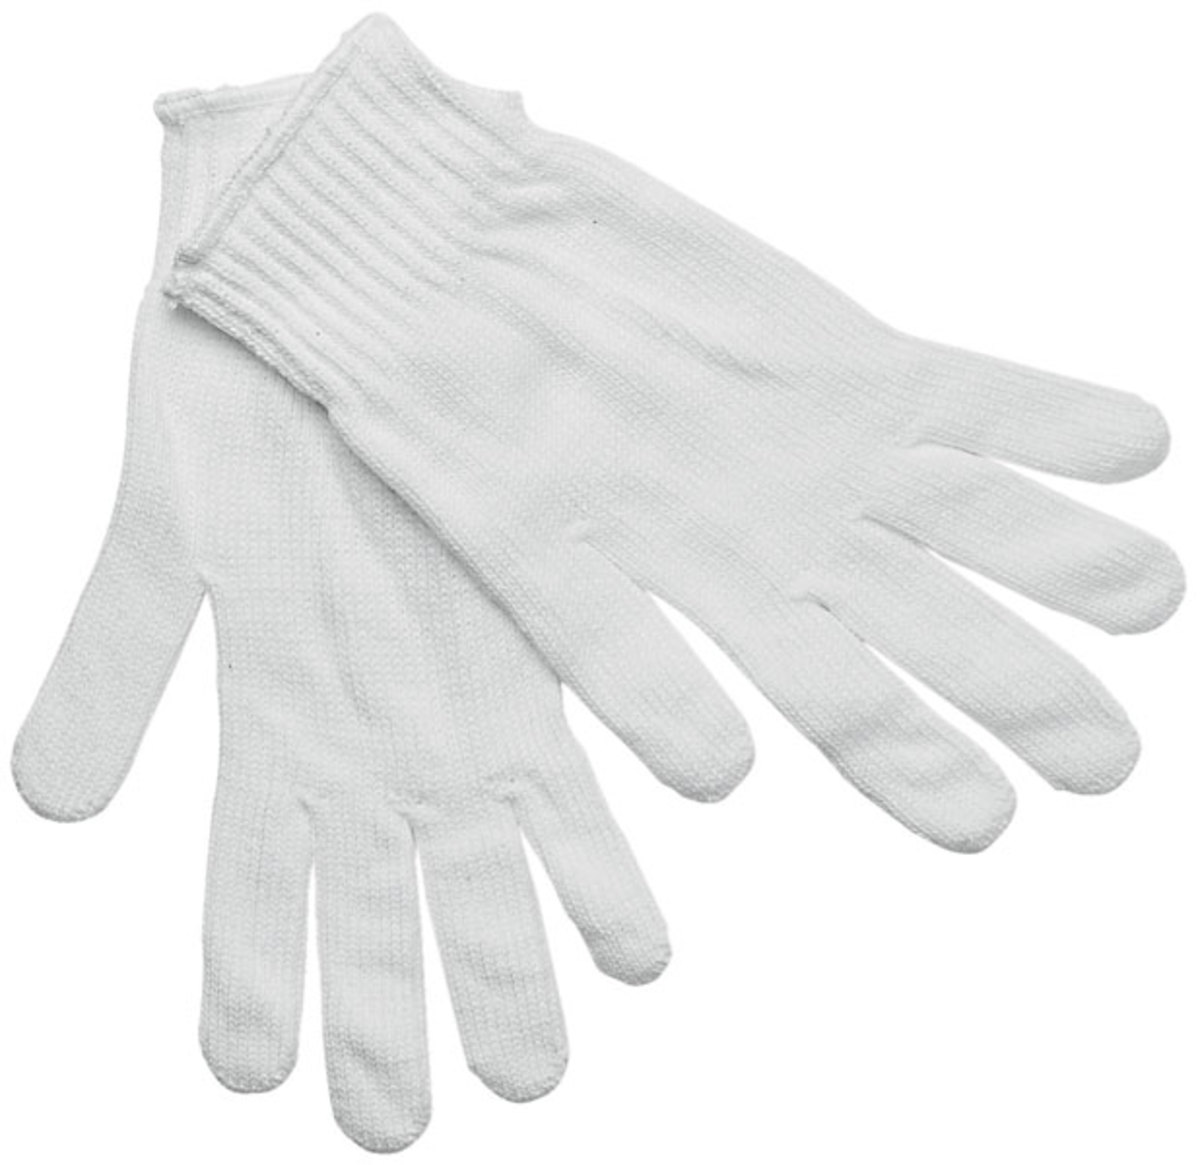 Memphis Glove White Small 7 Gauge Polyester String Knit Work Gloves With Knit Wrist